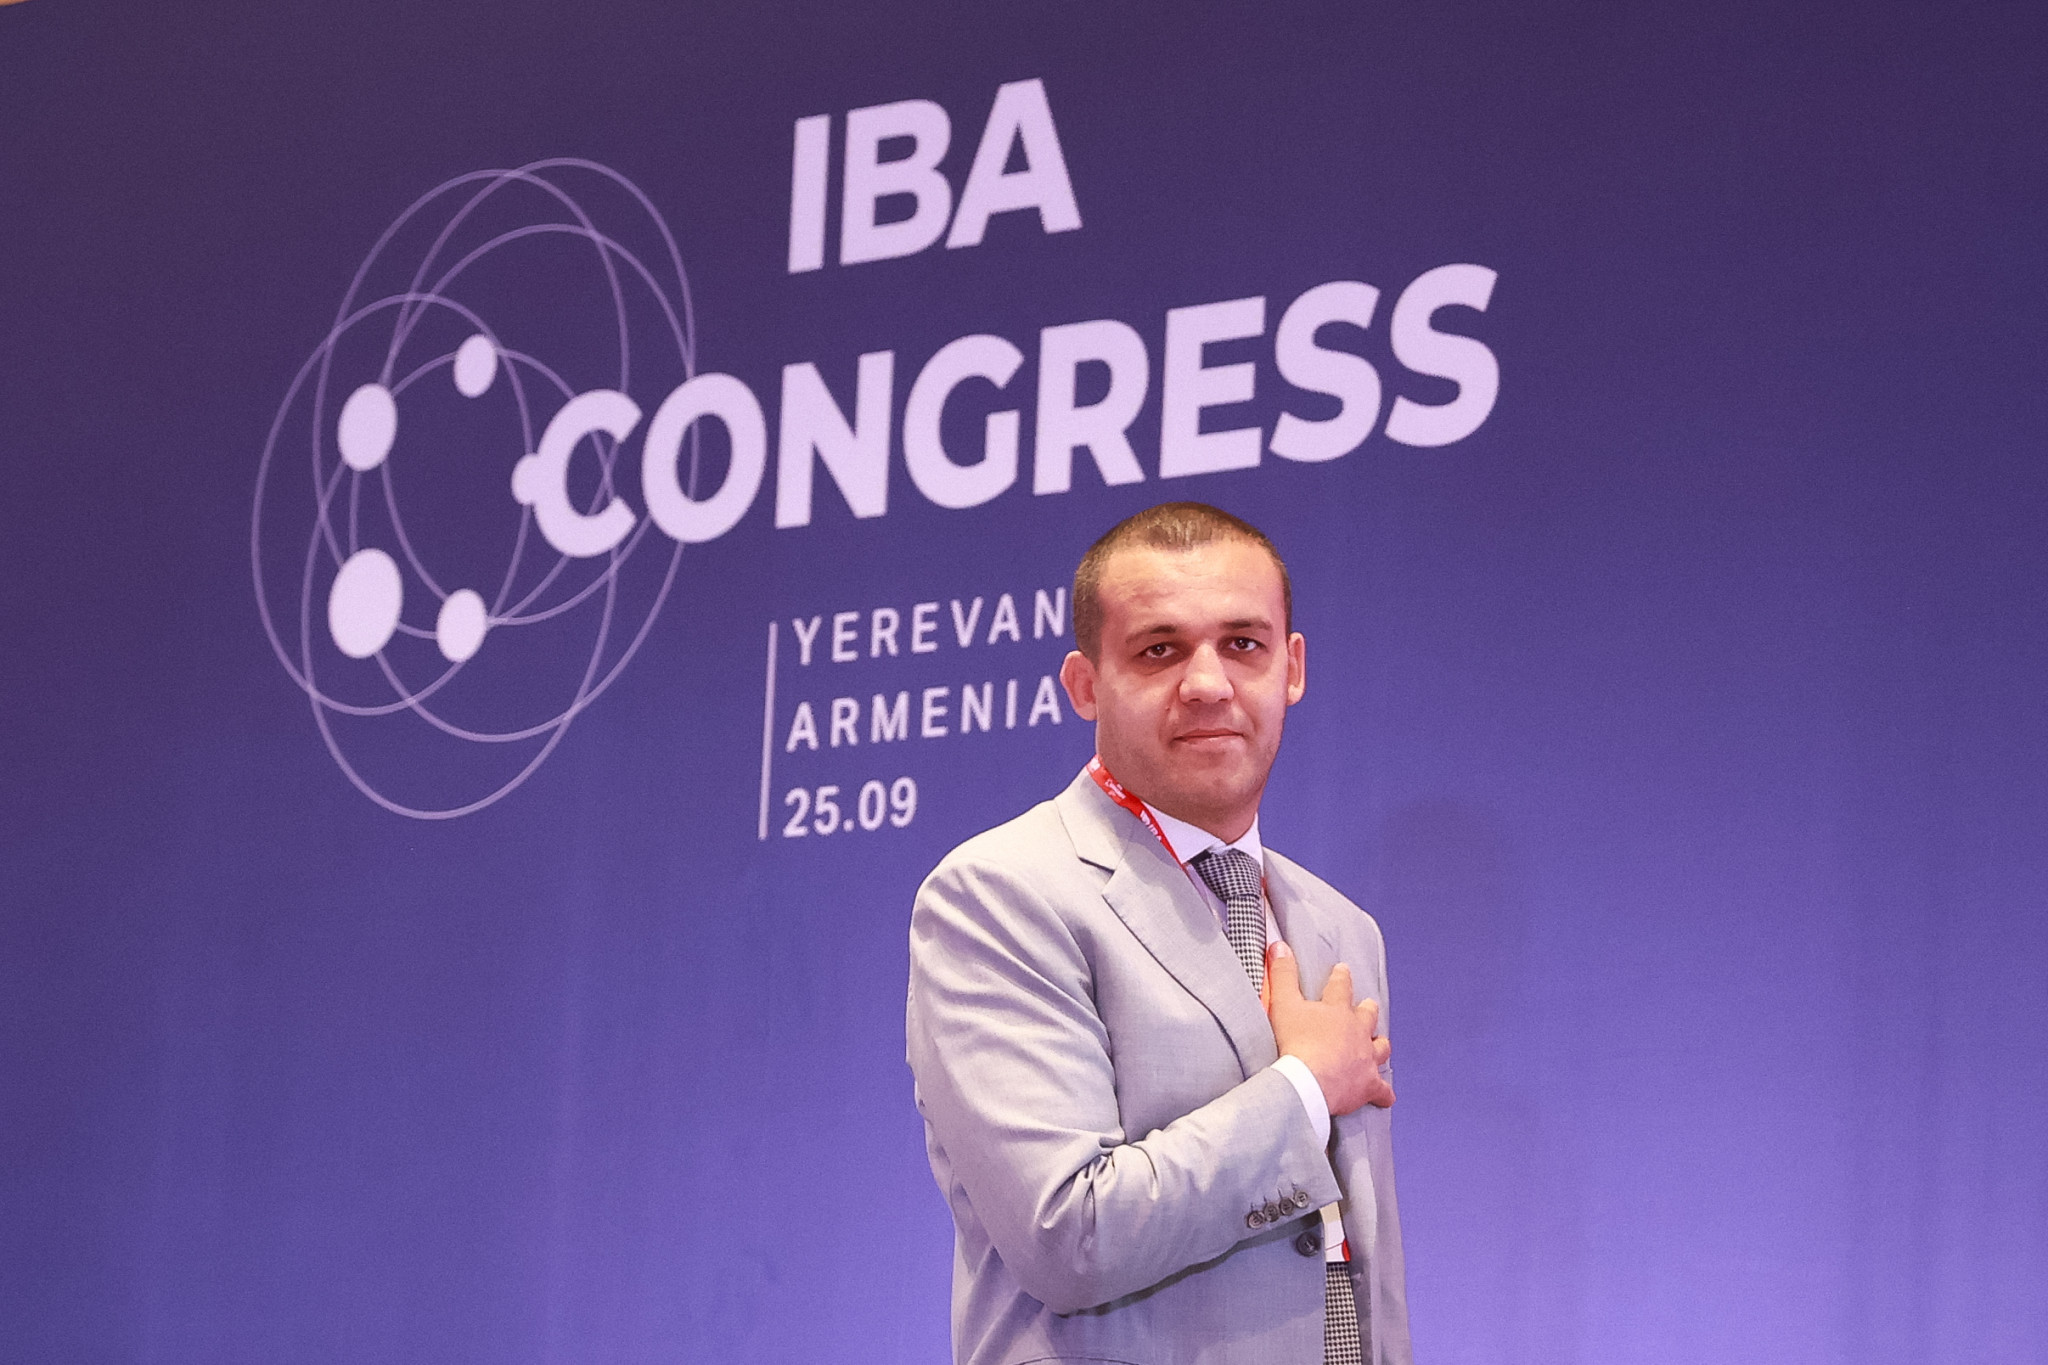 Russian official Umar Kremlev has firmly cemented his status as IBA President after the Extraordinary Congress ©IBA